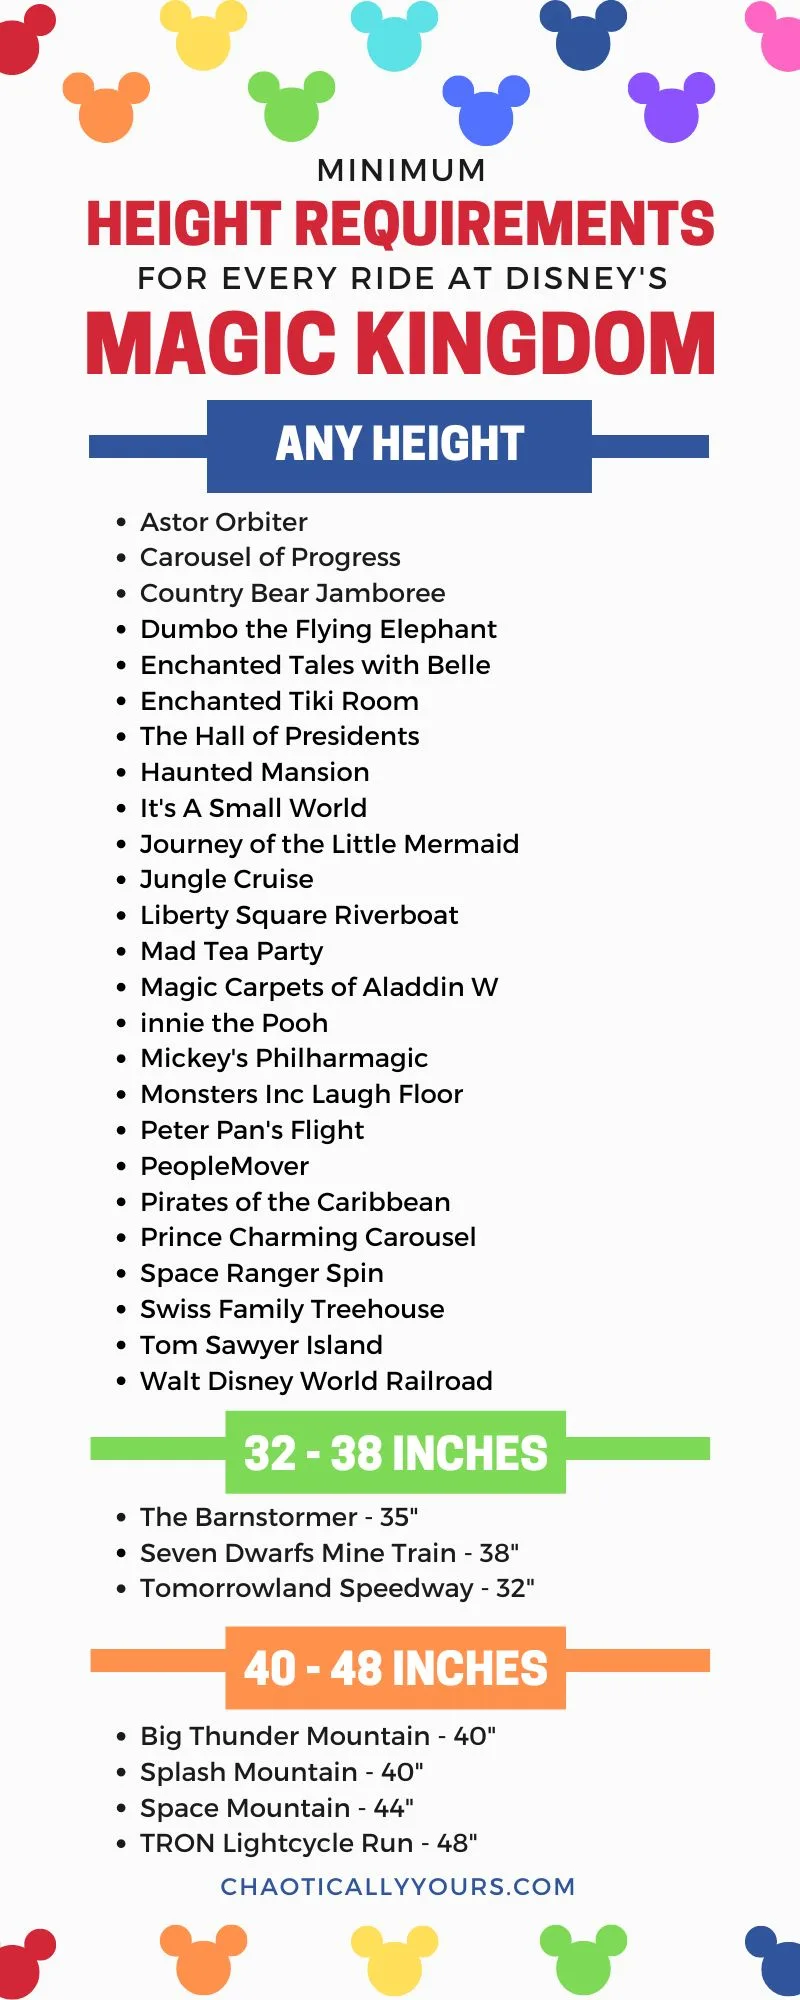 Infographic List of Magic Kingdom height requirements